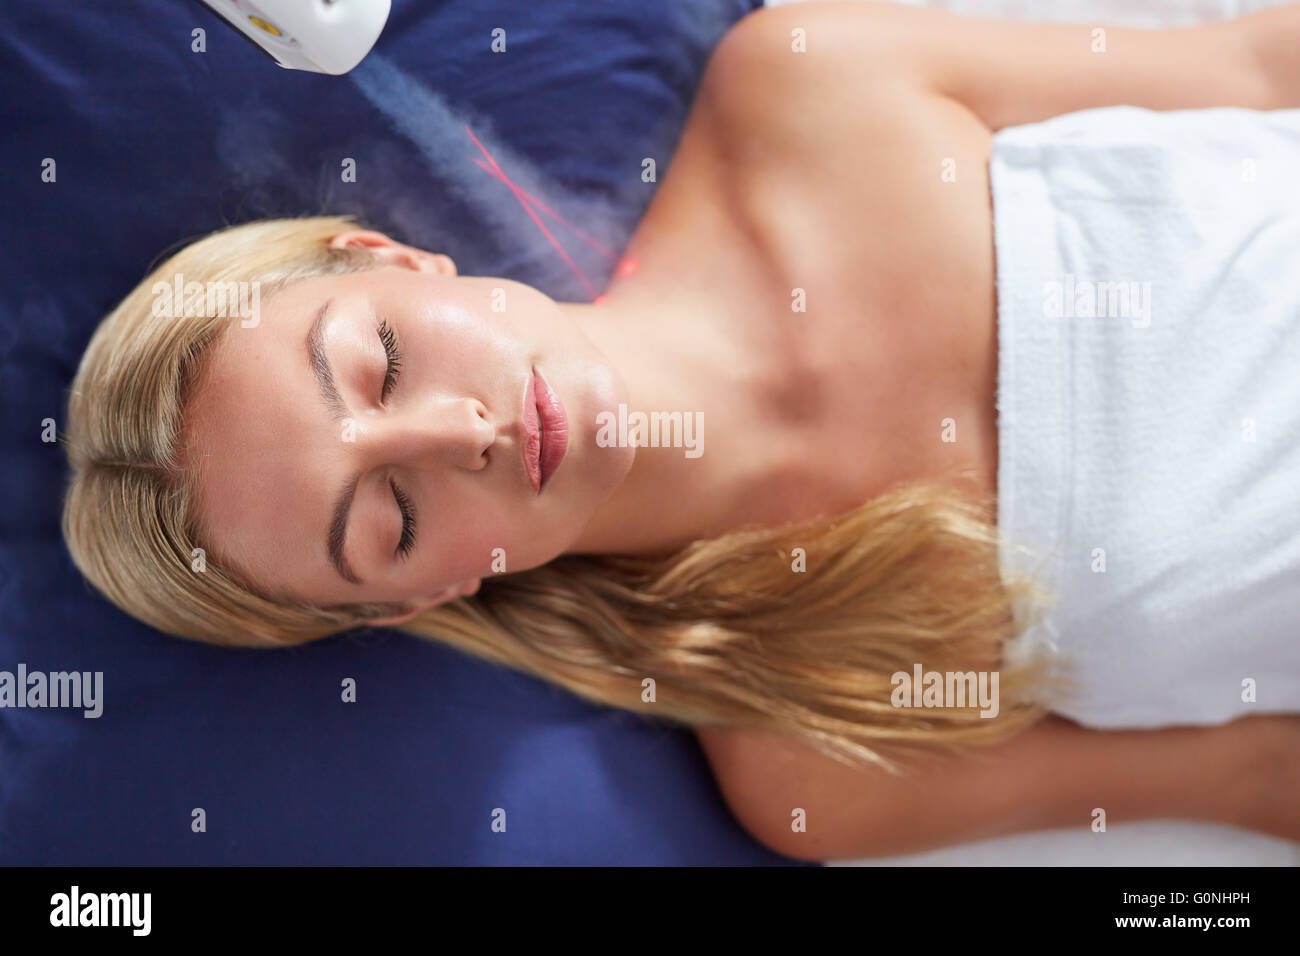 Localized cryotherapy session to the neck of young woman. Ice cold nitrogen vapors applied to the neck and shoulders. Stock Photo